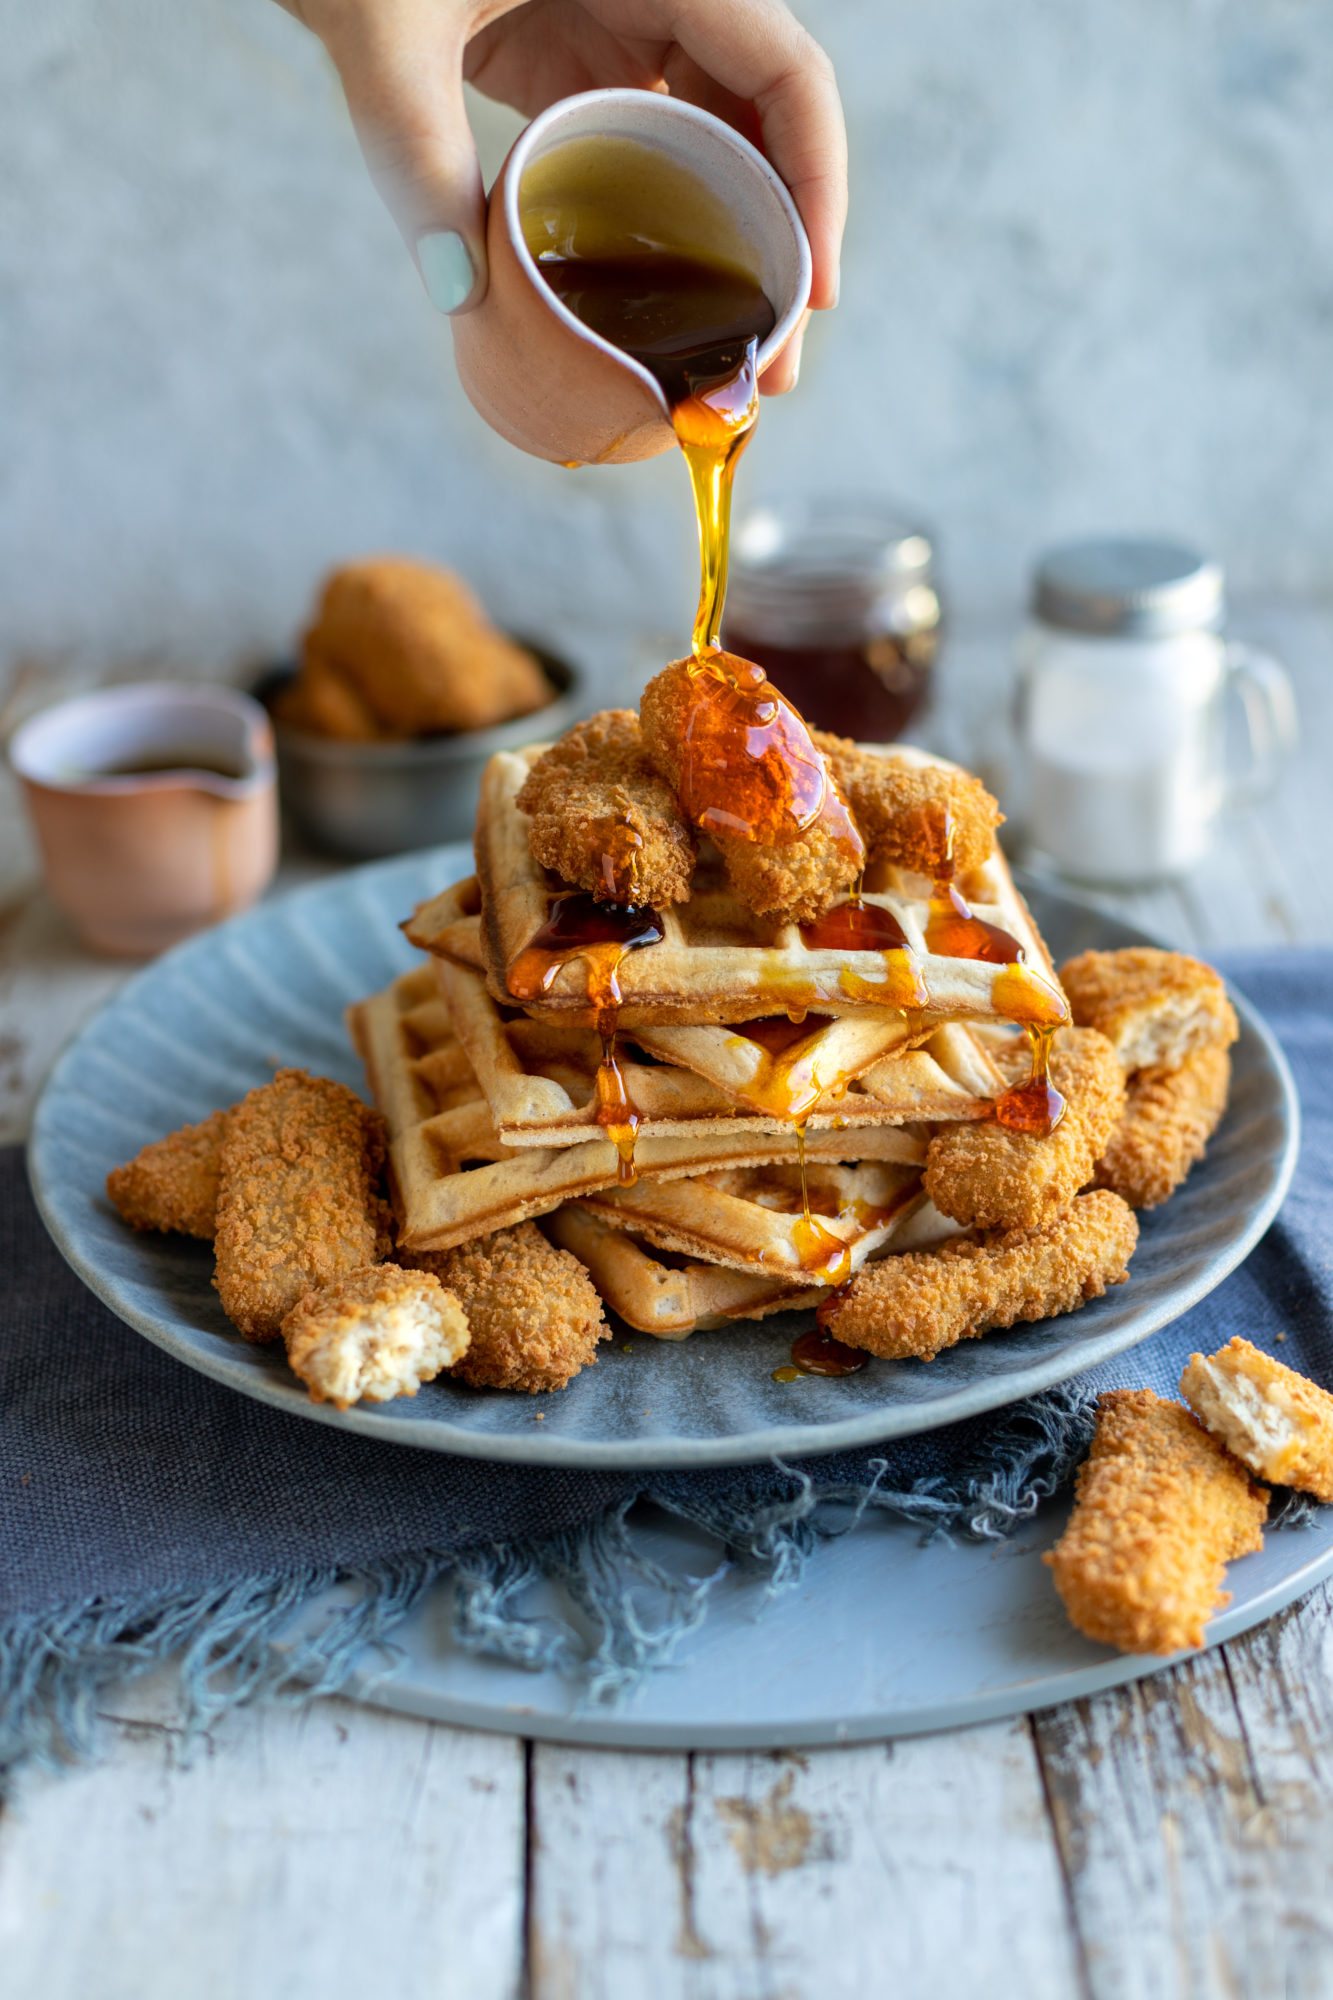 Fry's Chicken-style nuggets with waffles